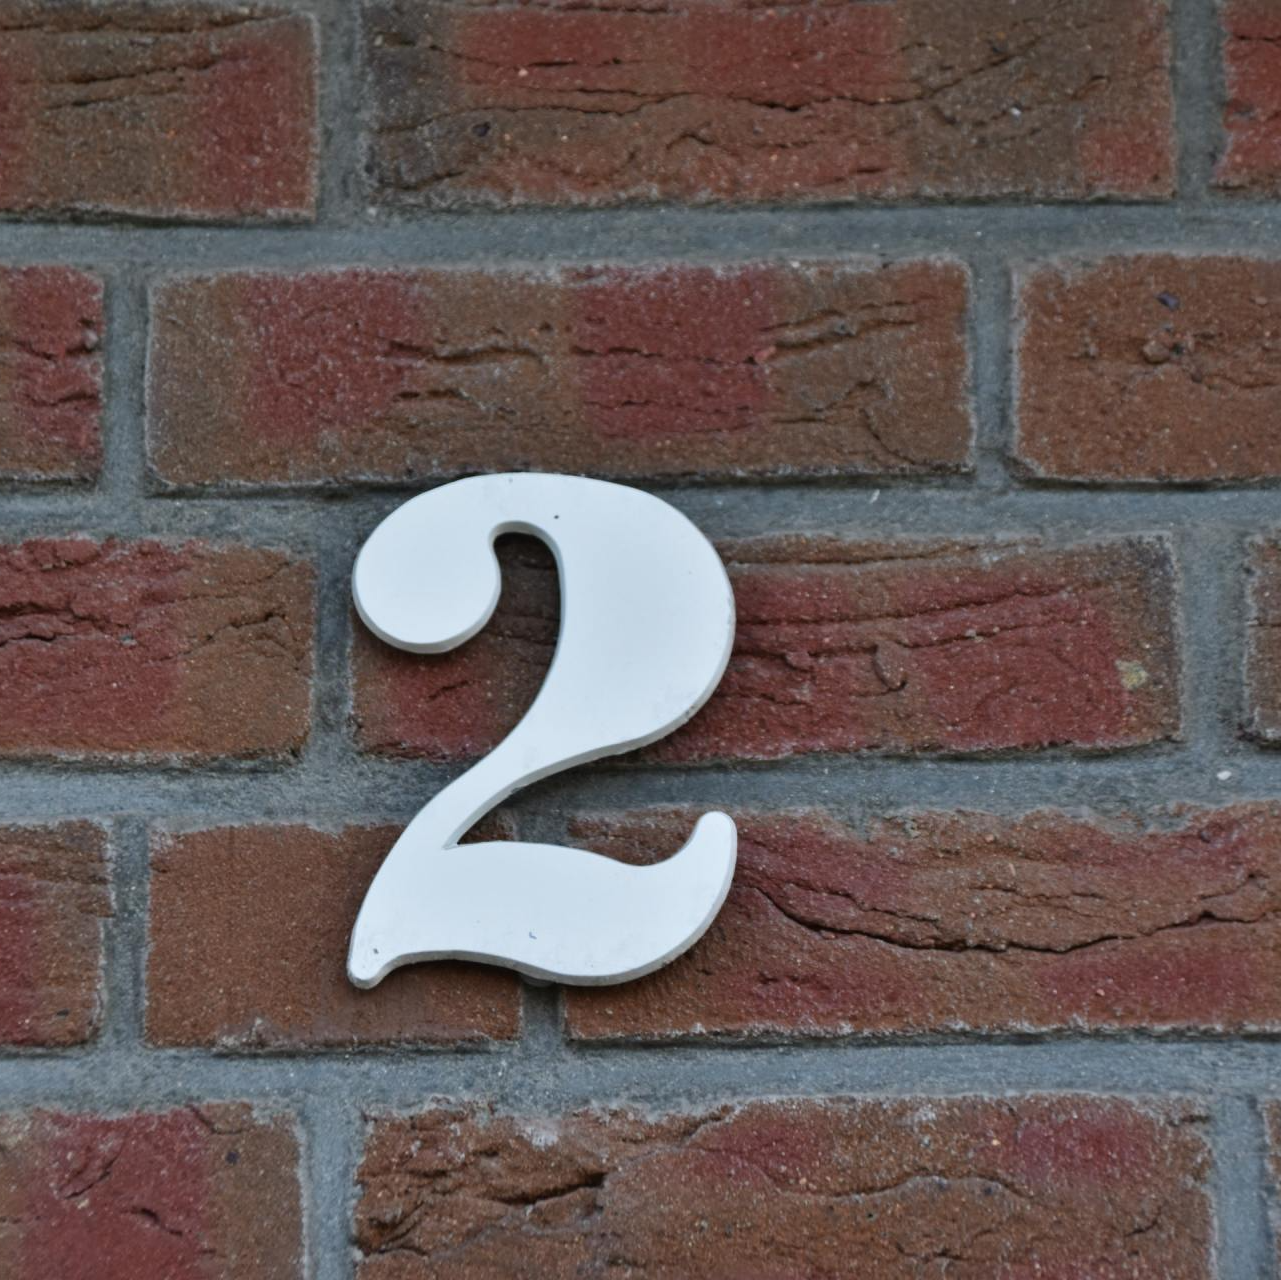 Photograph of a white number 2 against brick wall